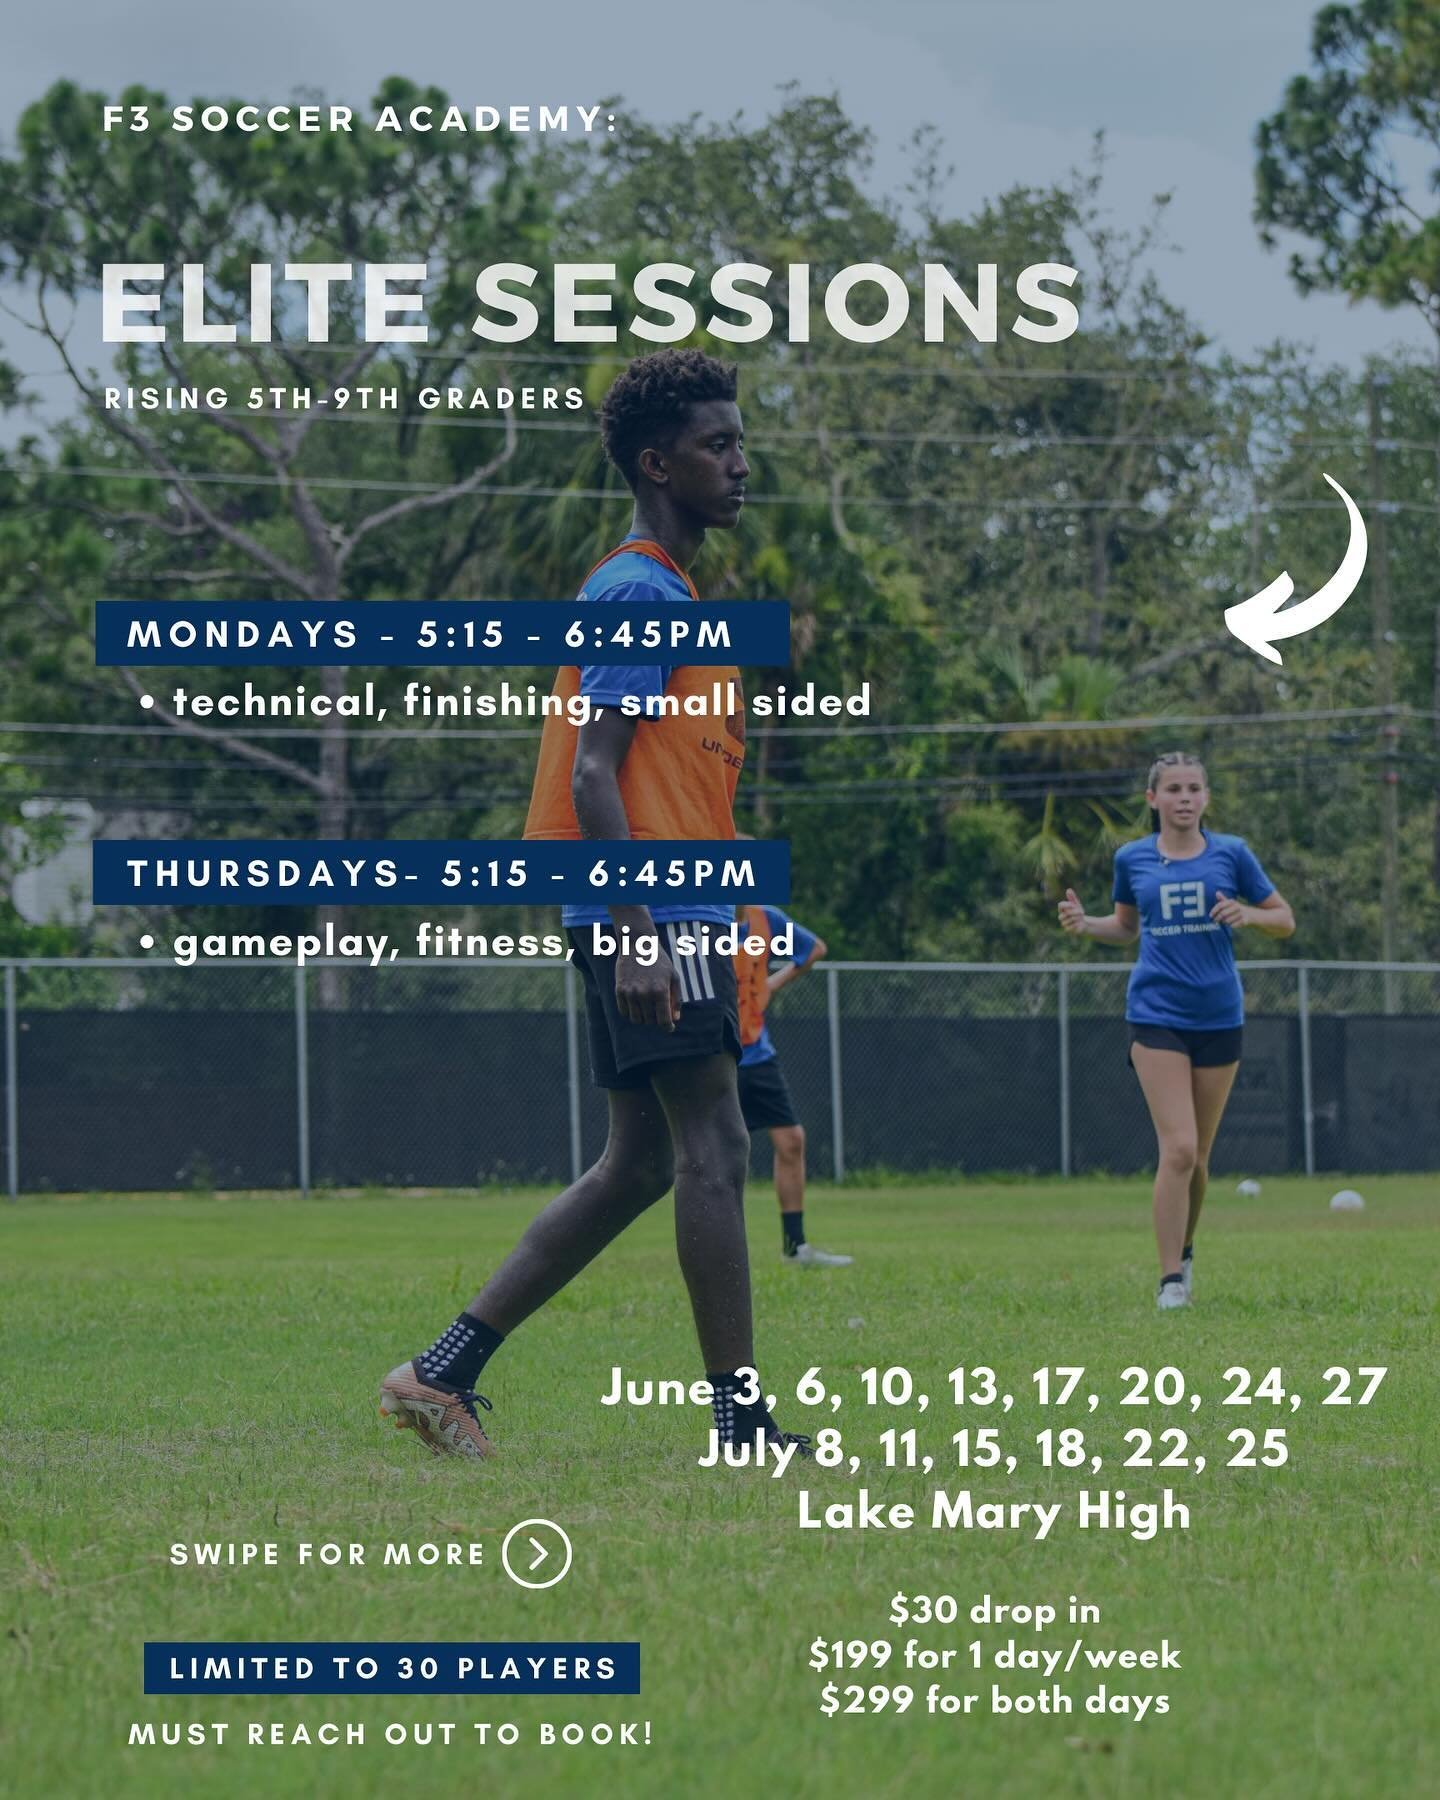 LOCK IN 🔒 

High level training for experienced players looking to make strides this summer and push for greatness 💪🏼 

Registration is open on the website (f3soccer.com/booking) for our current players. If you&rsquo;re new to us, or haven&rsquo;t